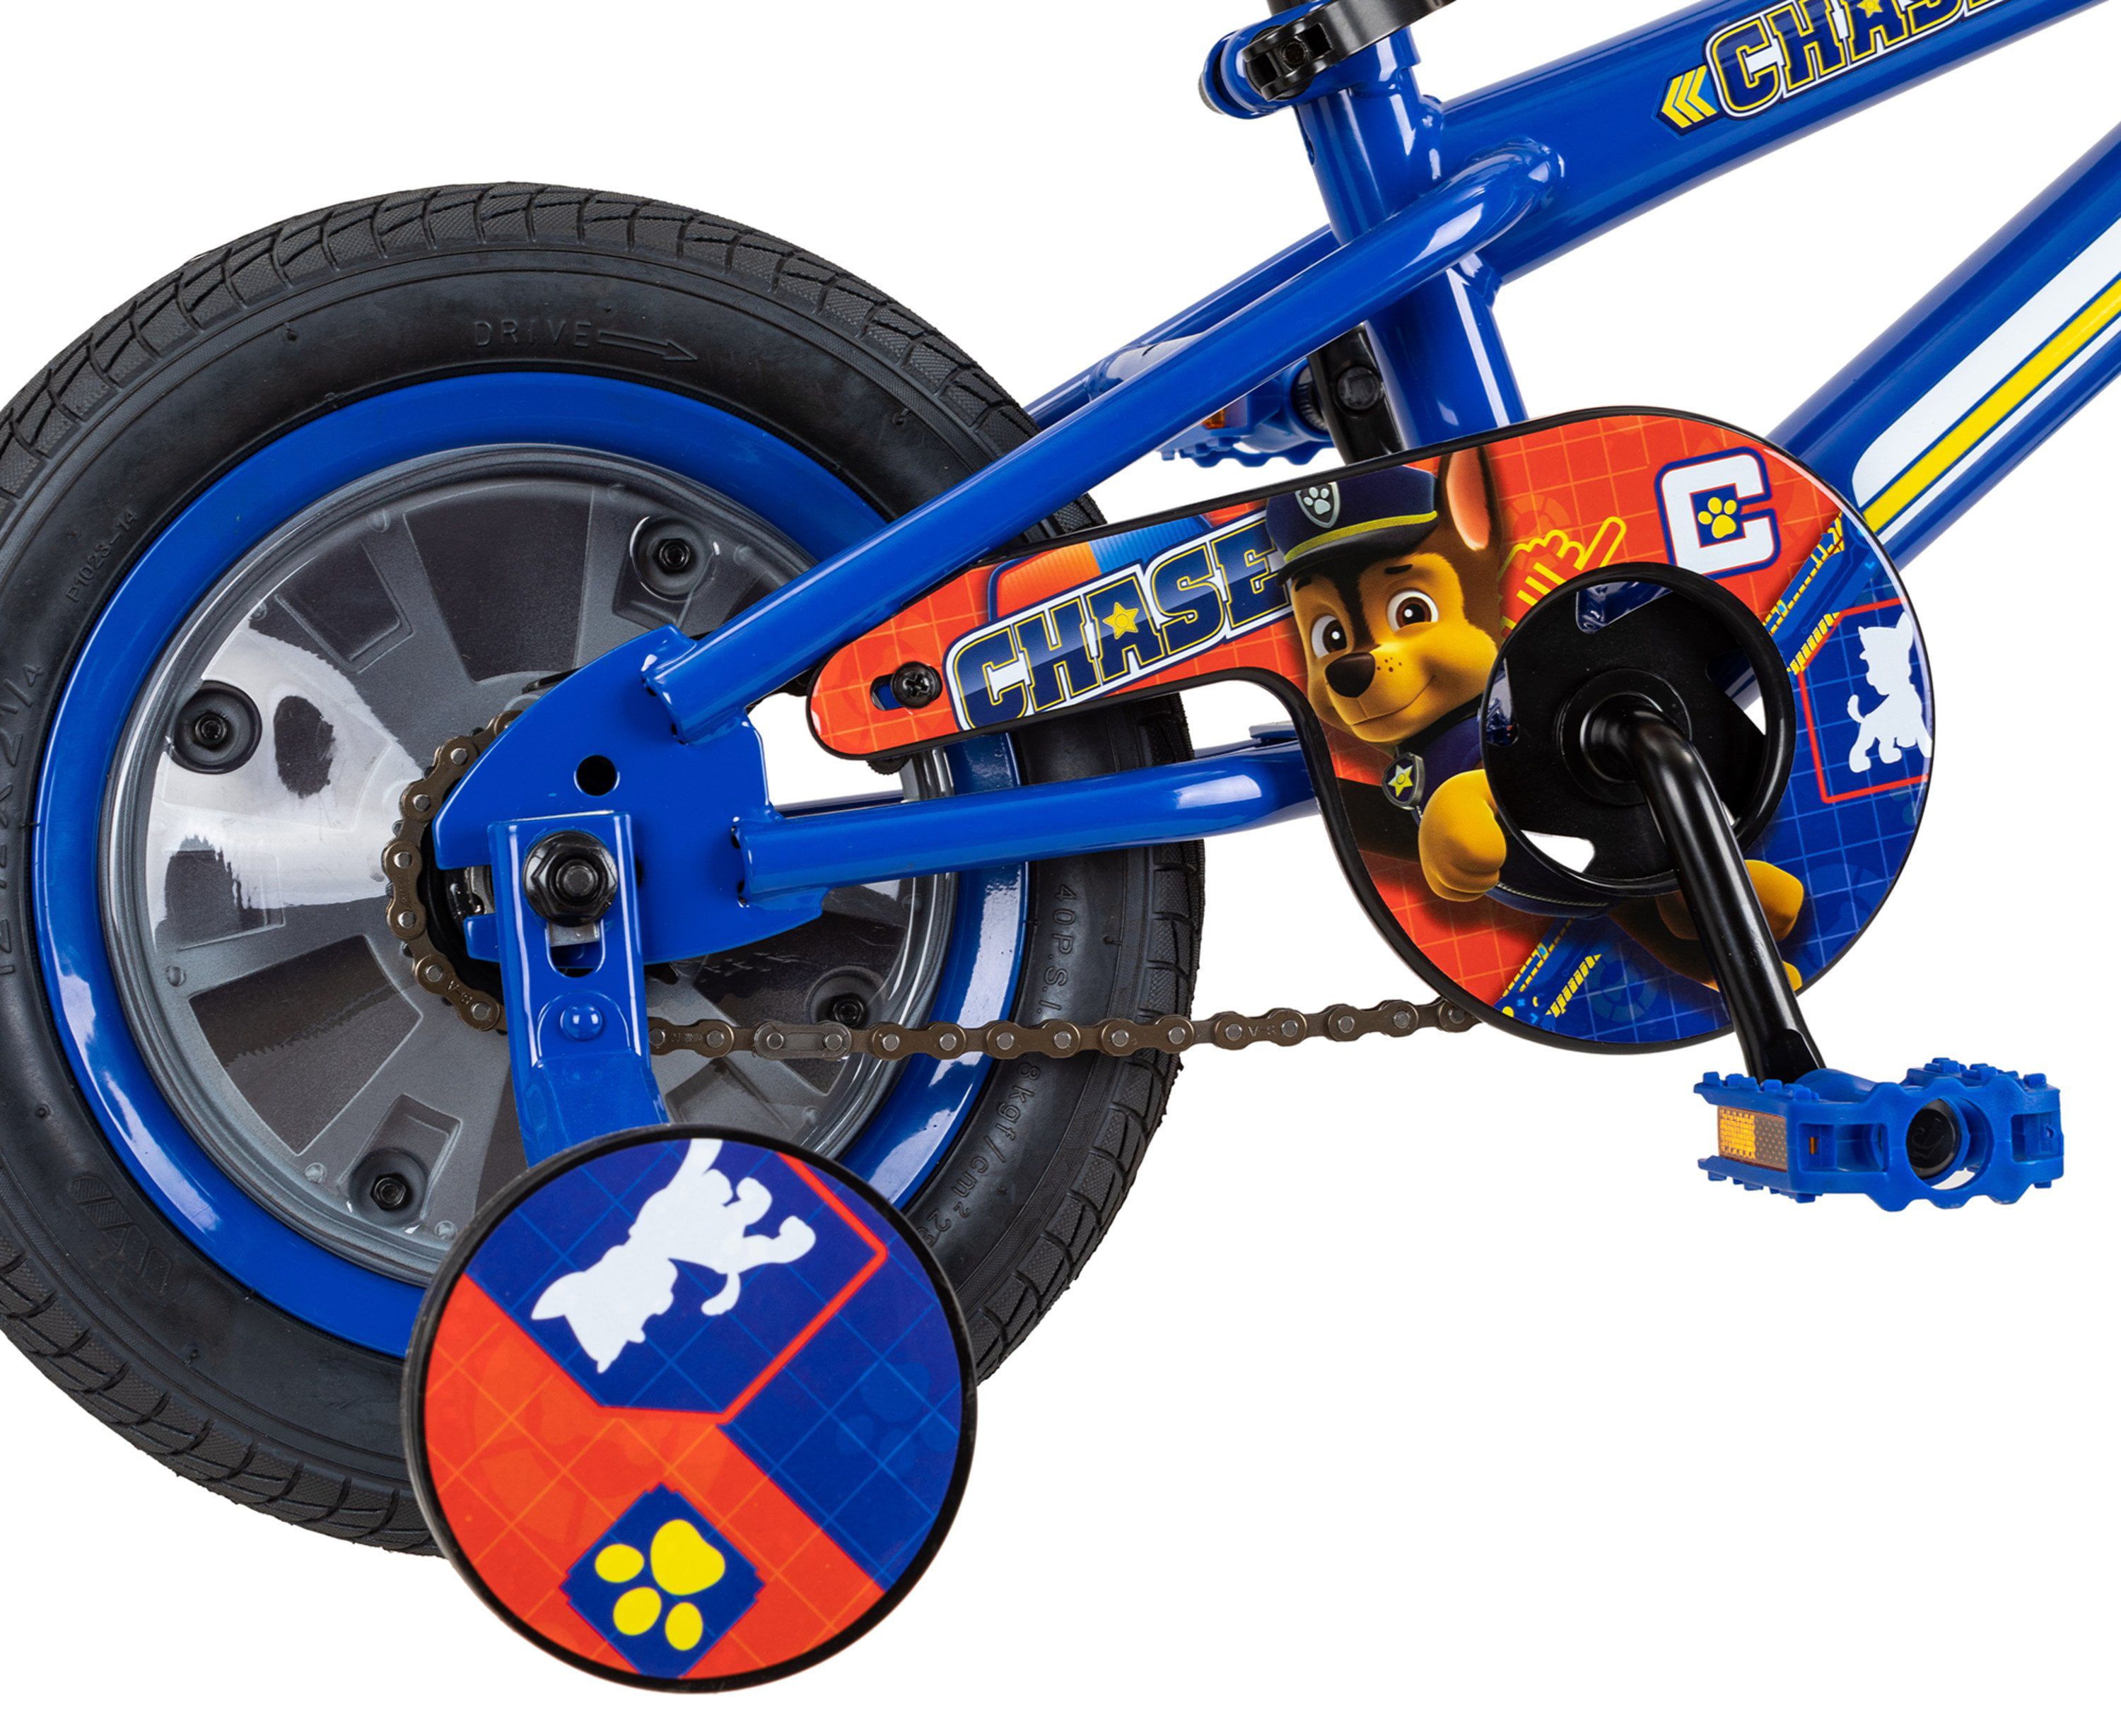 ages 2-4 12-inch wheels Nickelodeon's PAW Patrol: Chase Bicycle blue presc